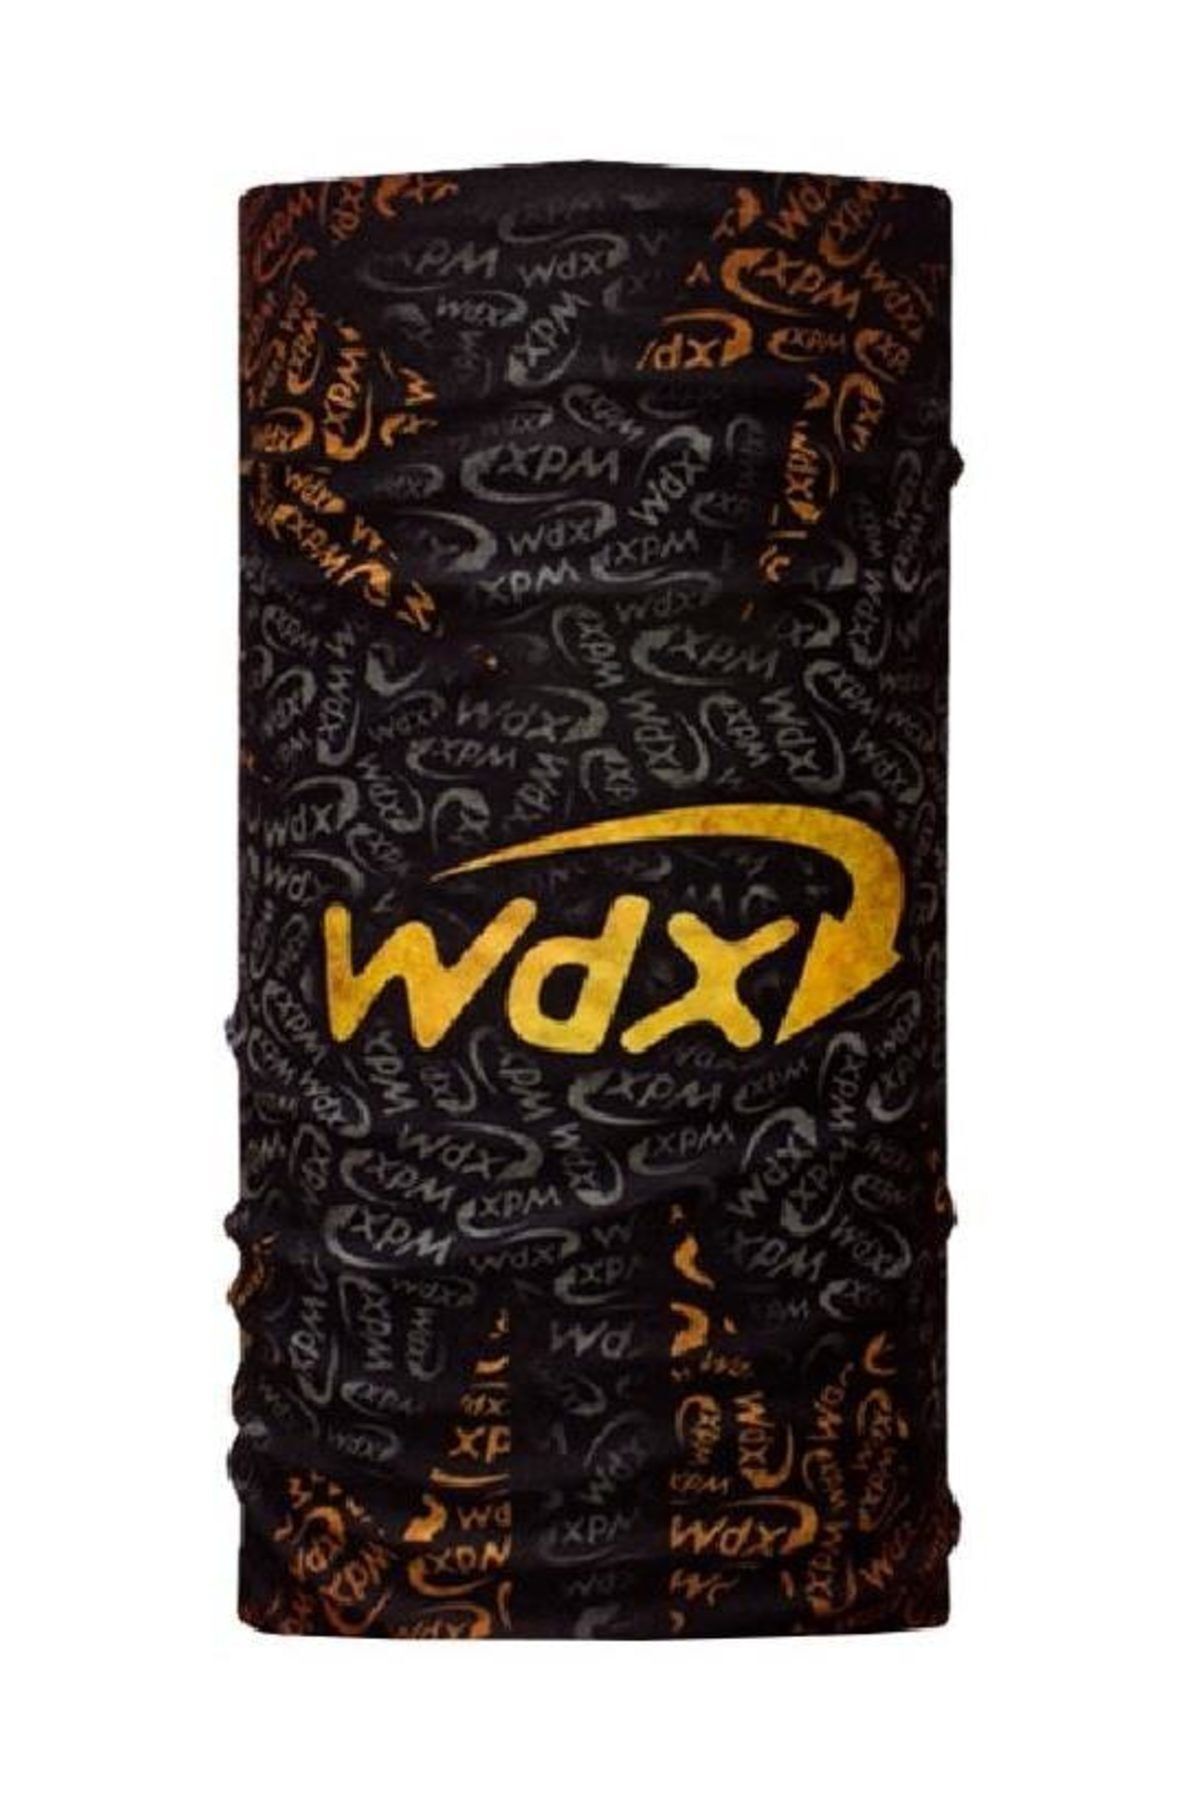 Wind Extreme Coolwind İnsecta Wdx Wd17088